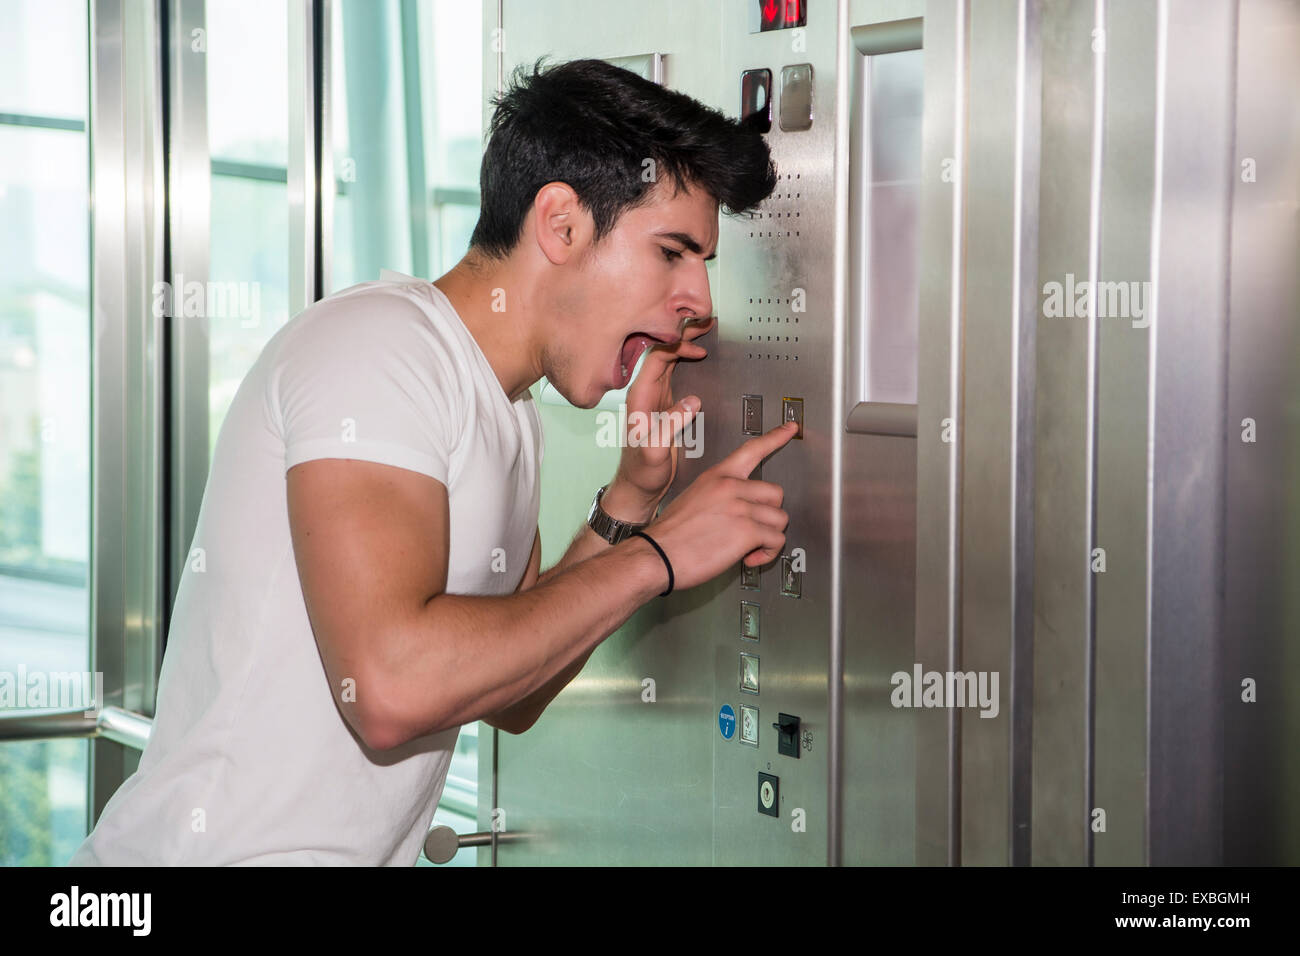 Scared young man desperate in stuck elevator screaming, looking very upset Stock Photo